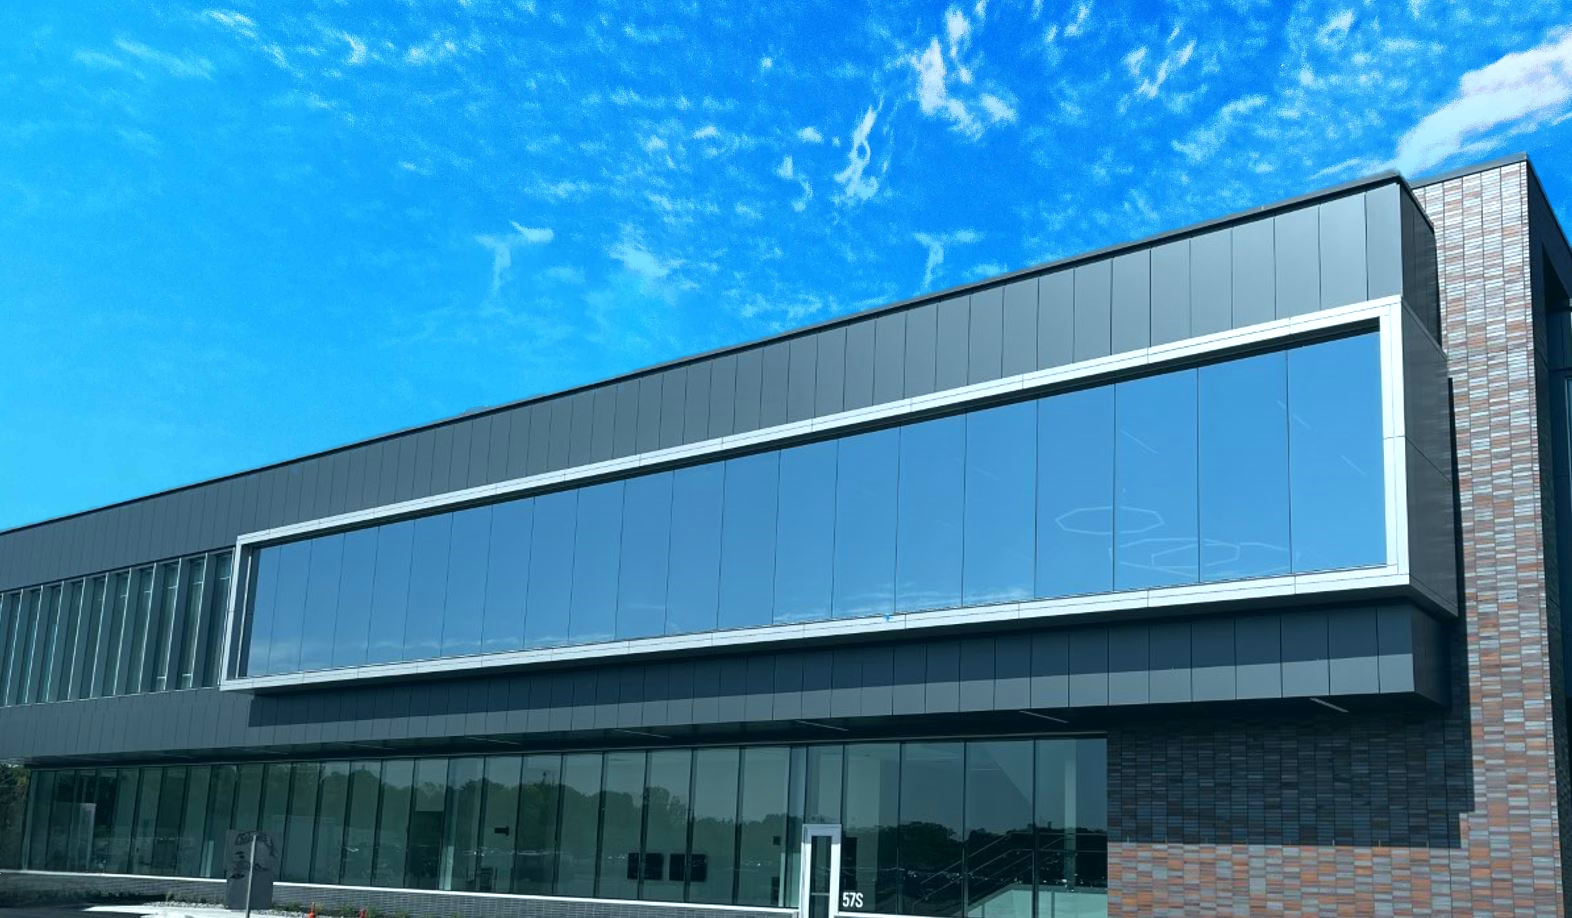 w l hall company The Premier Exterior and Interior Building Systems Provider in the Upper Midwest boston scientific glass & glazing 6